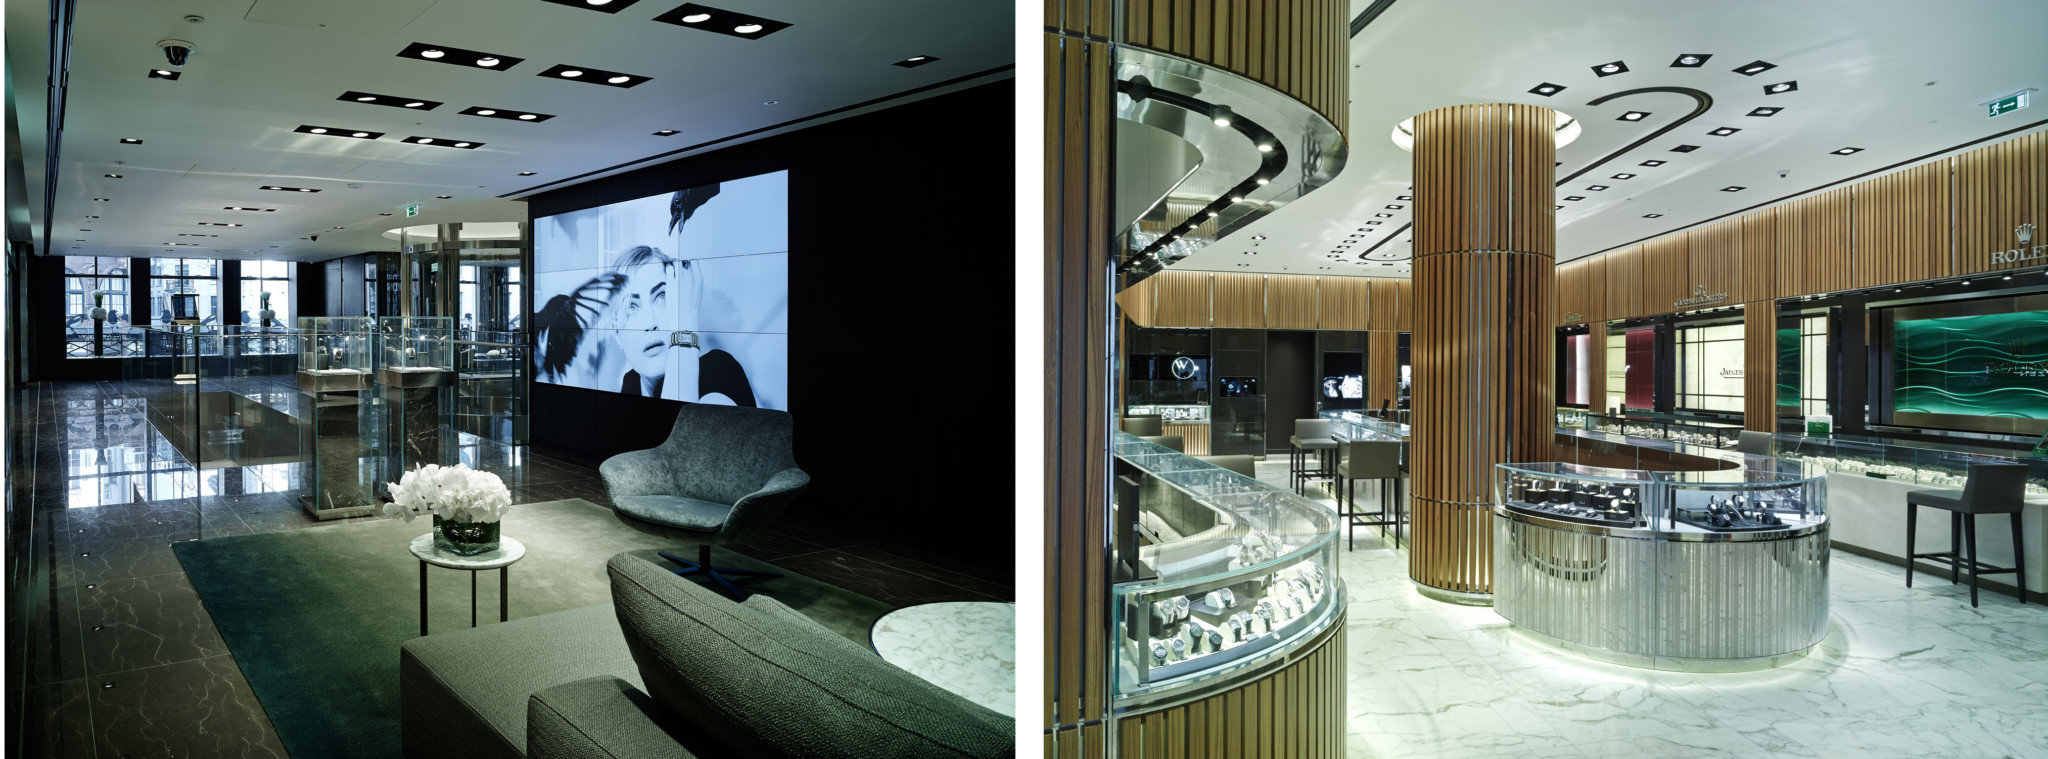 The luxurious and innovative retail environment of stores like watches of switzerland's regent street flagship is setting a new global standard that is leaving the rest of the world lagging behind.